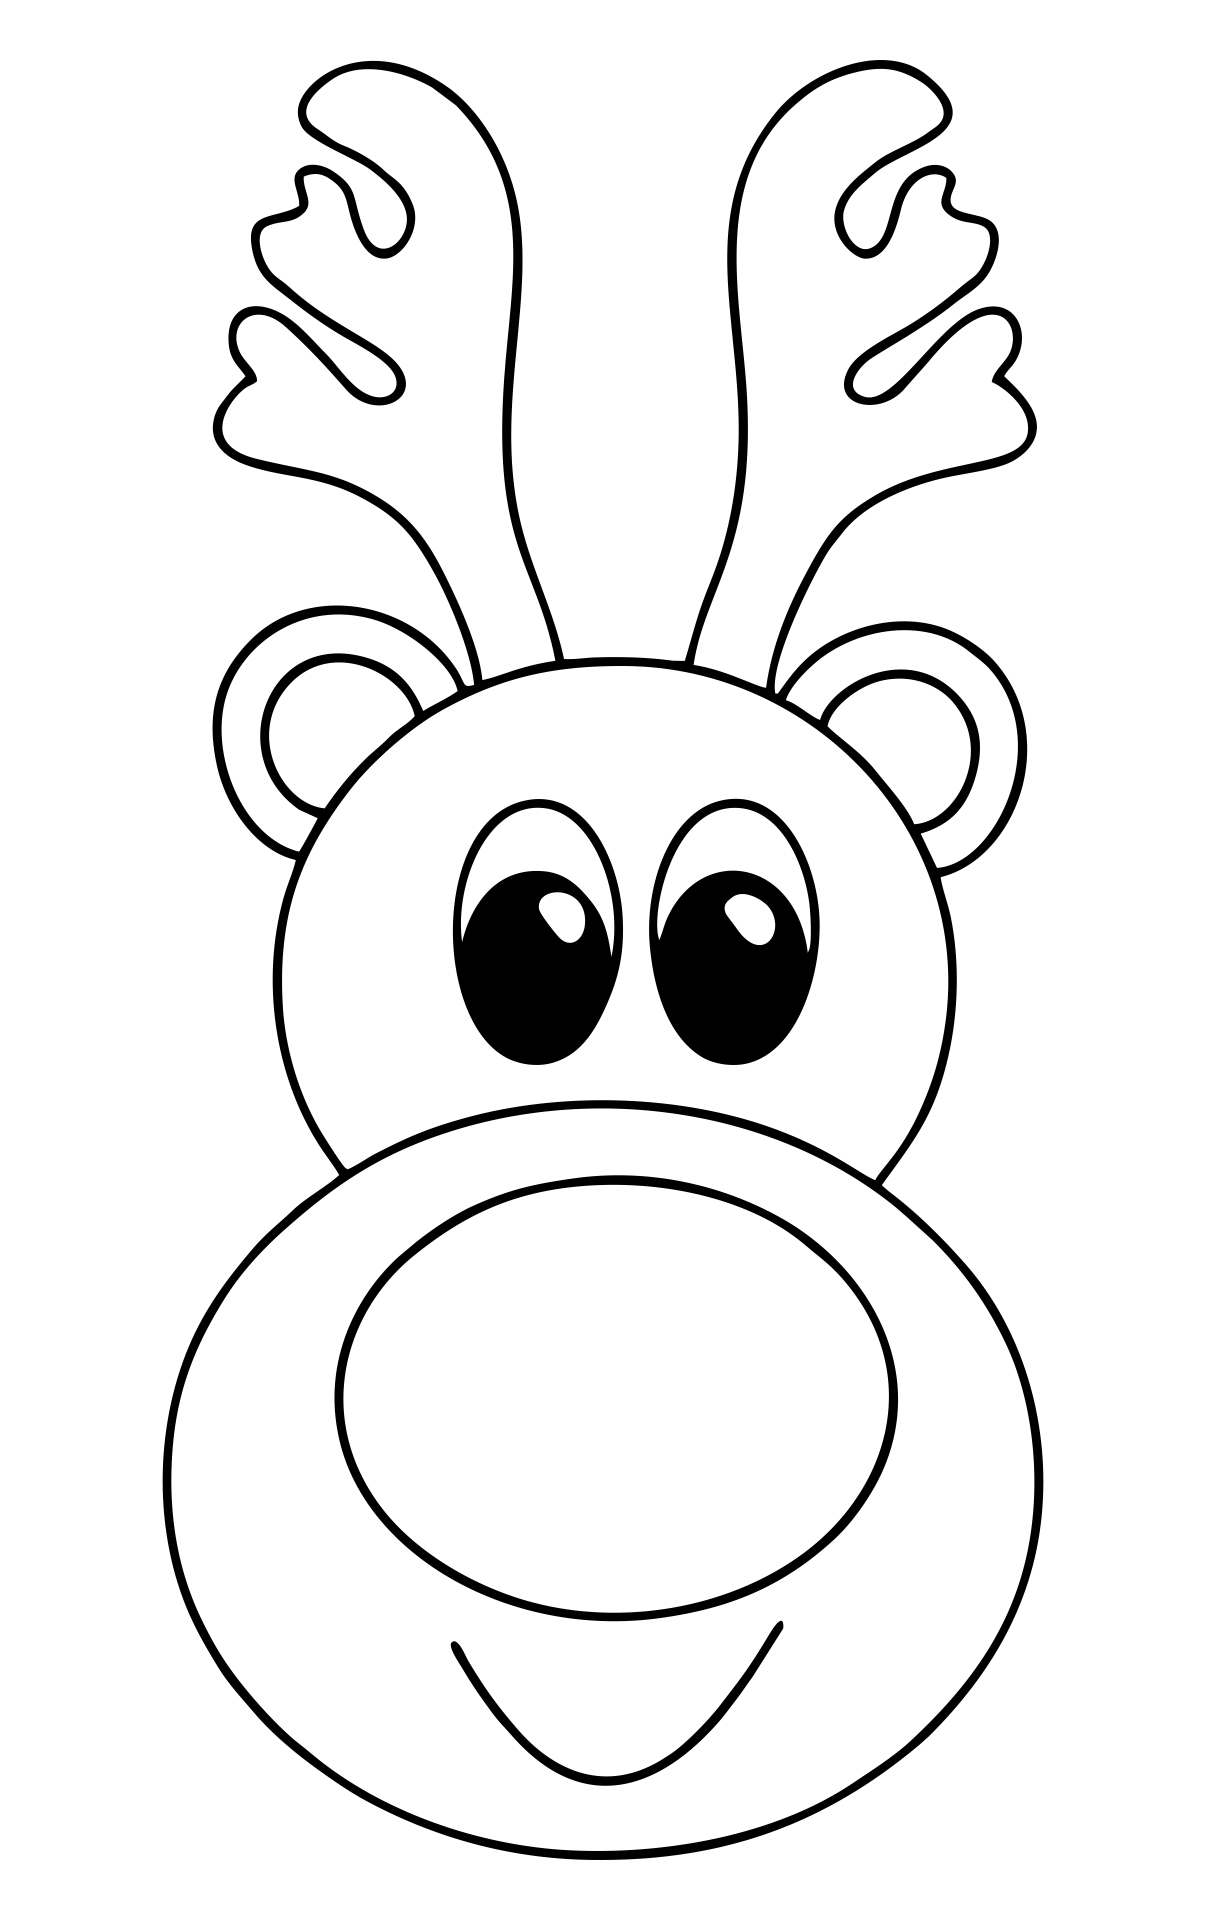 Cut Out Reindeer Template Printable Printable Templates